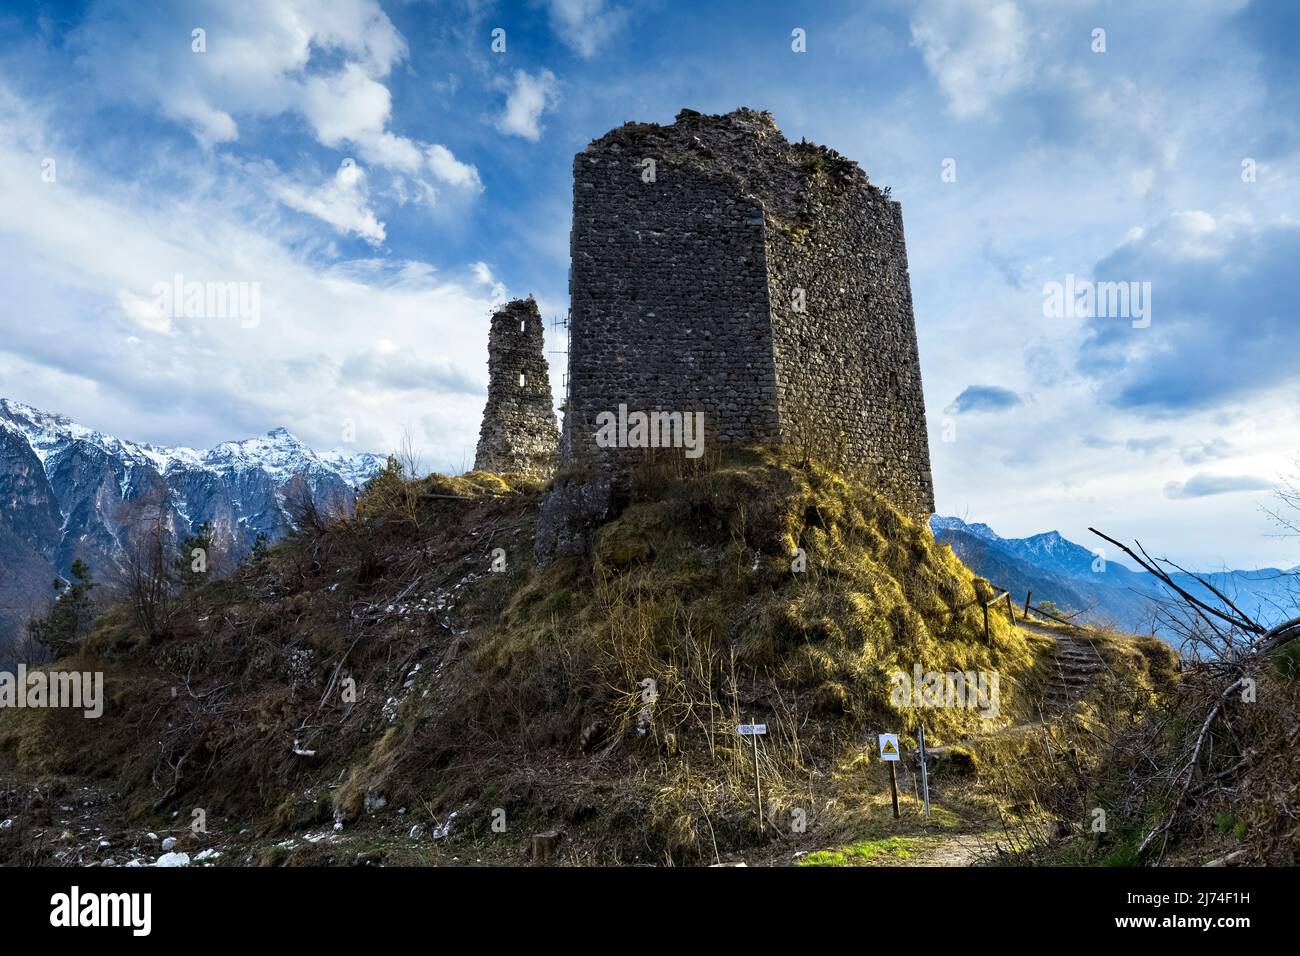 The medieval ruins of San Pietro castle stand out on the top of Mount Ciolino. Torcegno, Valsugana, Trento province, Trentino Alto-Adige, Italy. Stock Photo